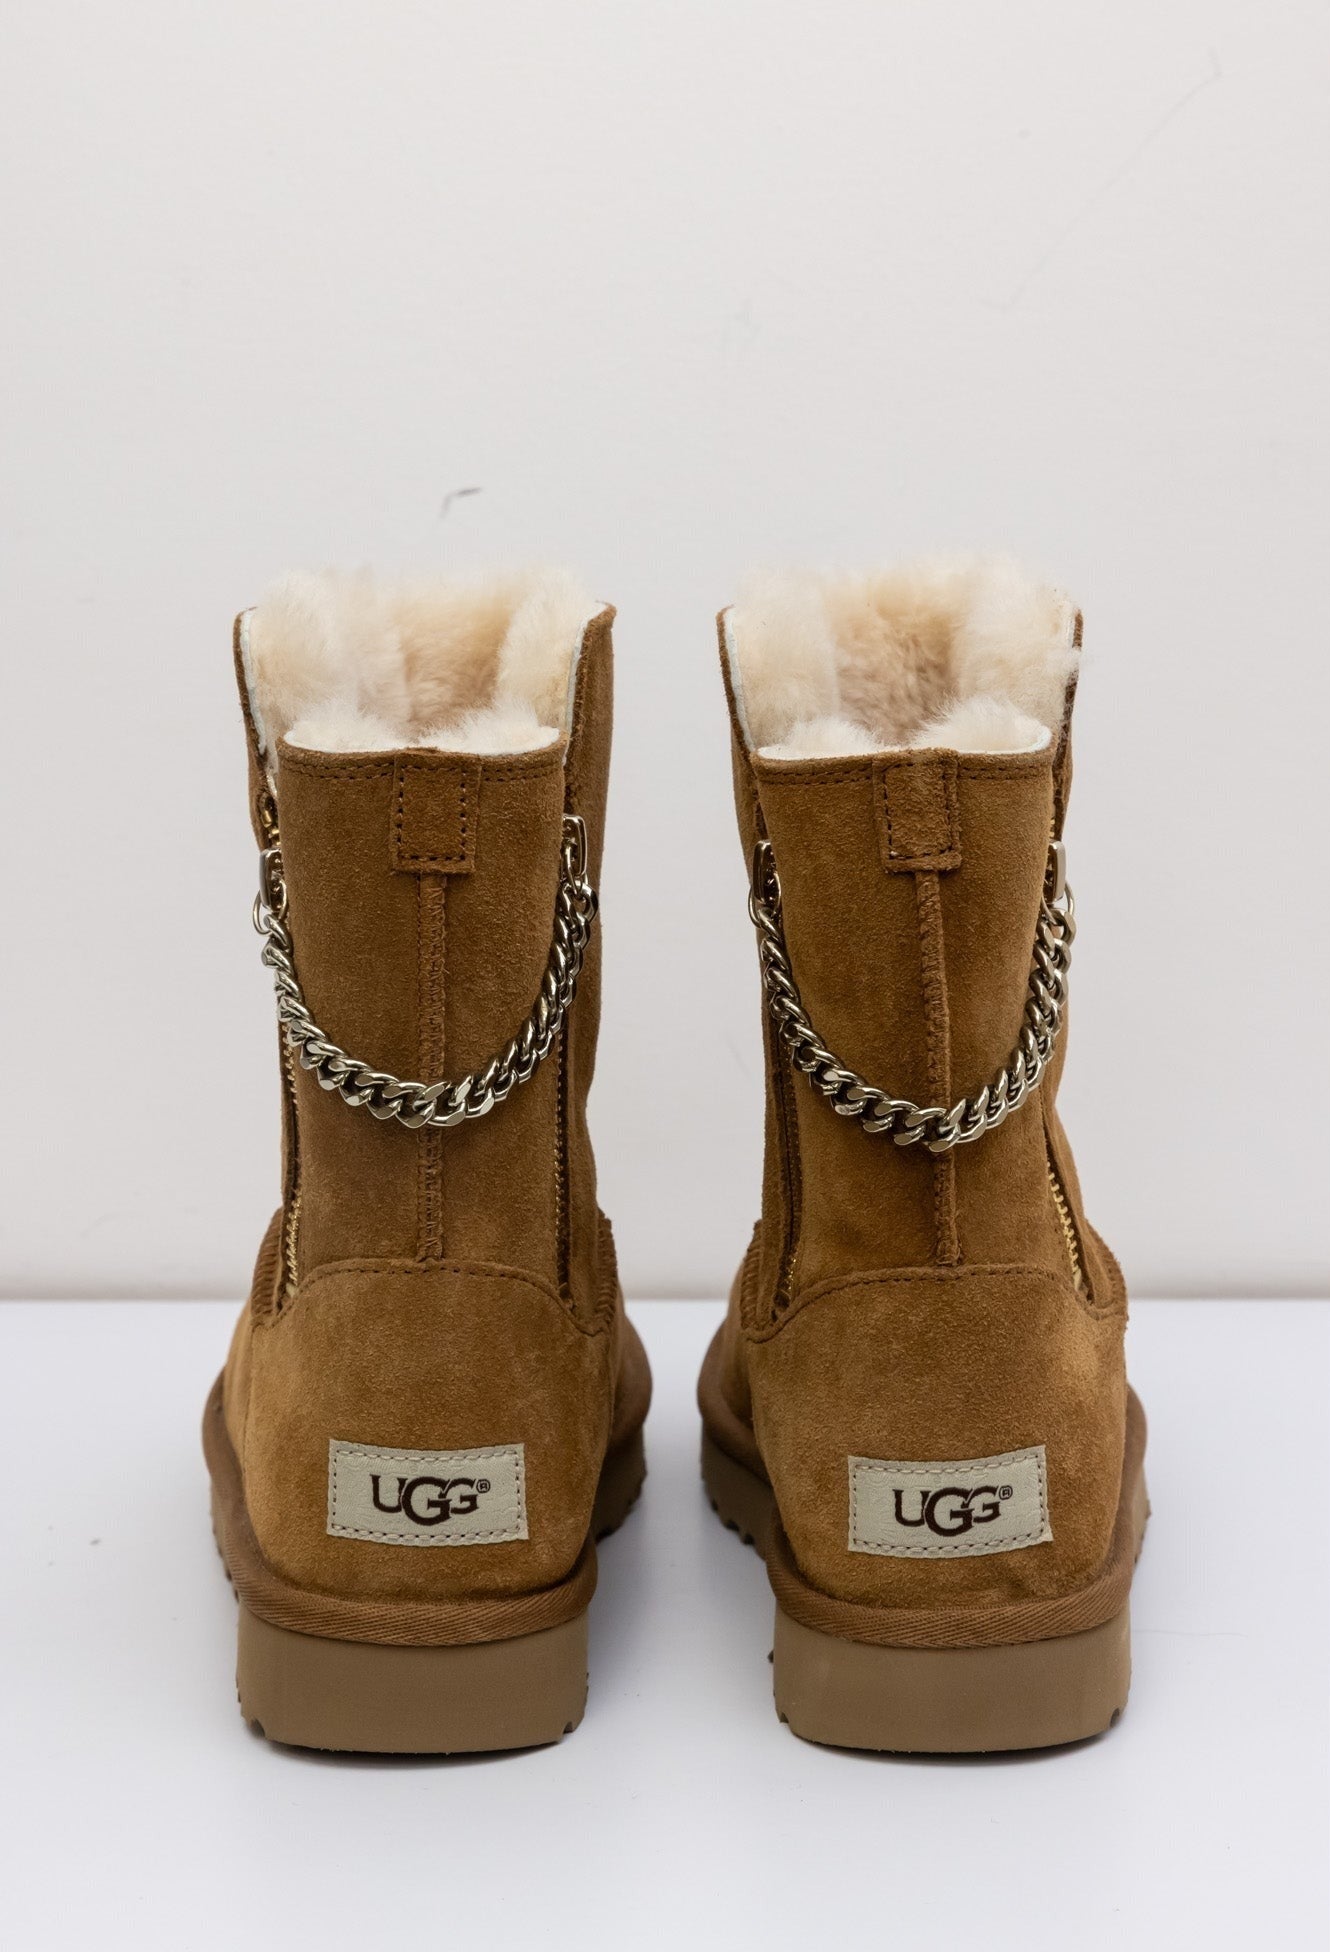 UGG Leather Ankle Boots | Sheepskin | Chestnut Brown | Metallic Zippers